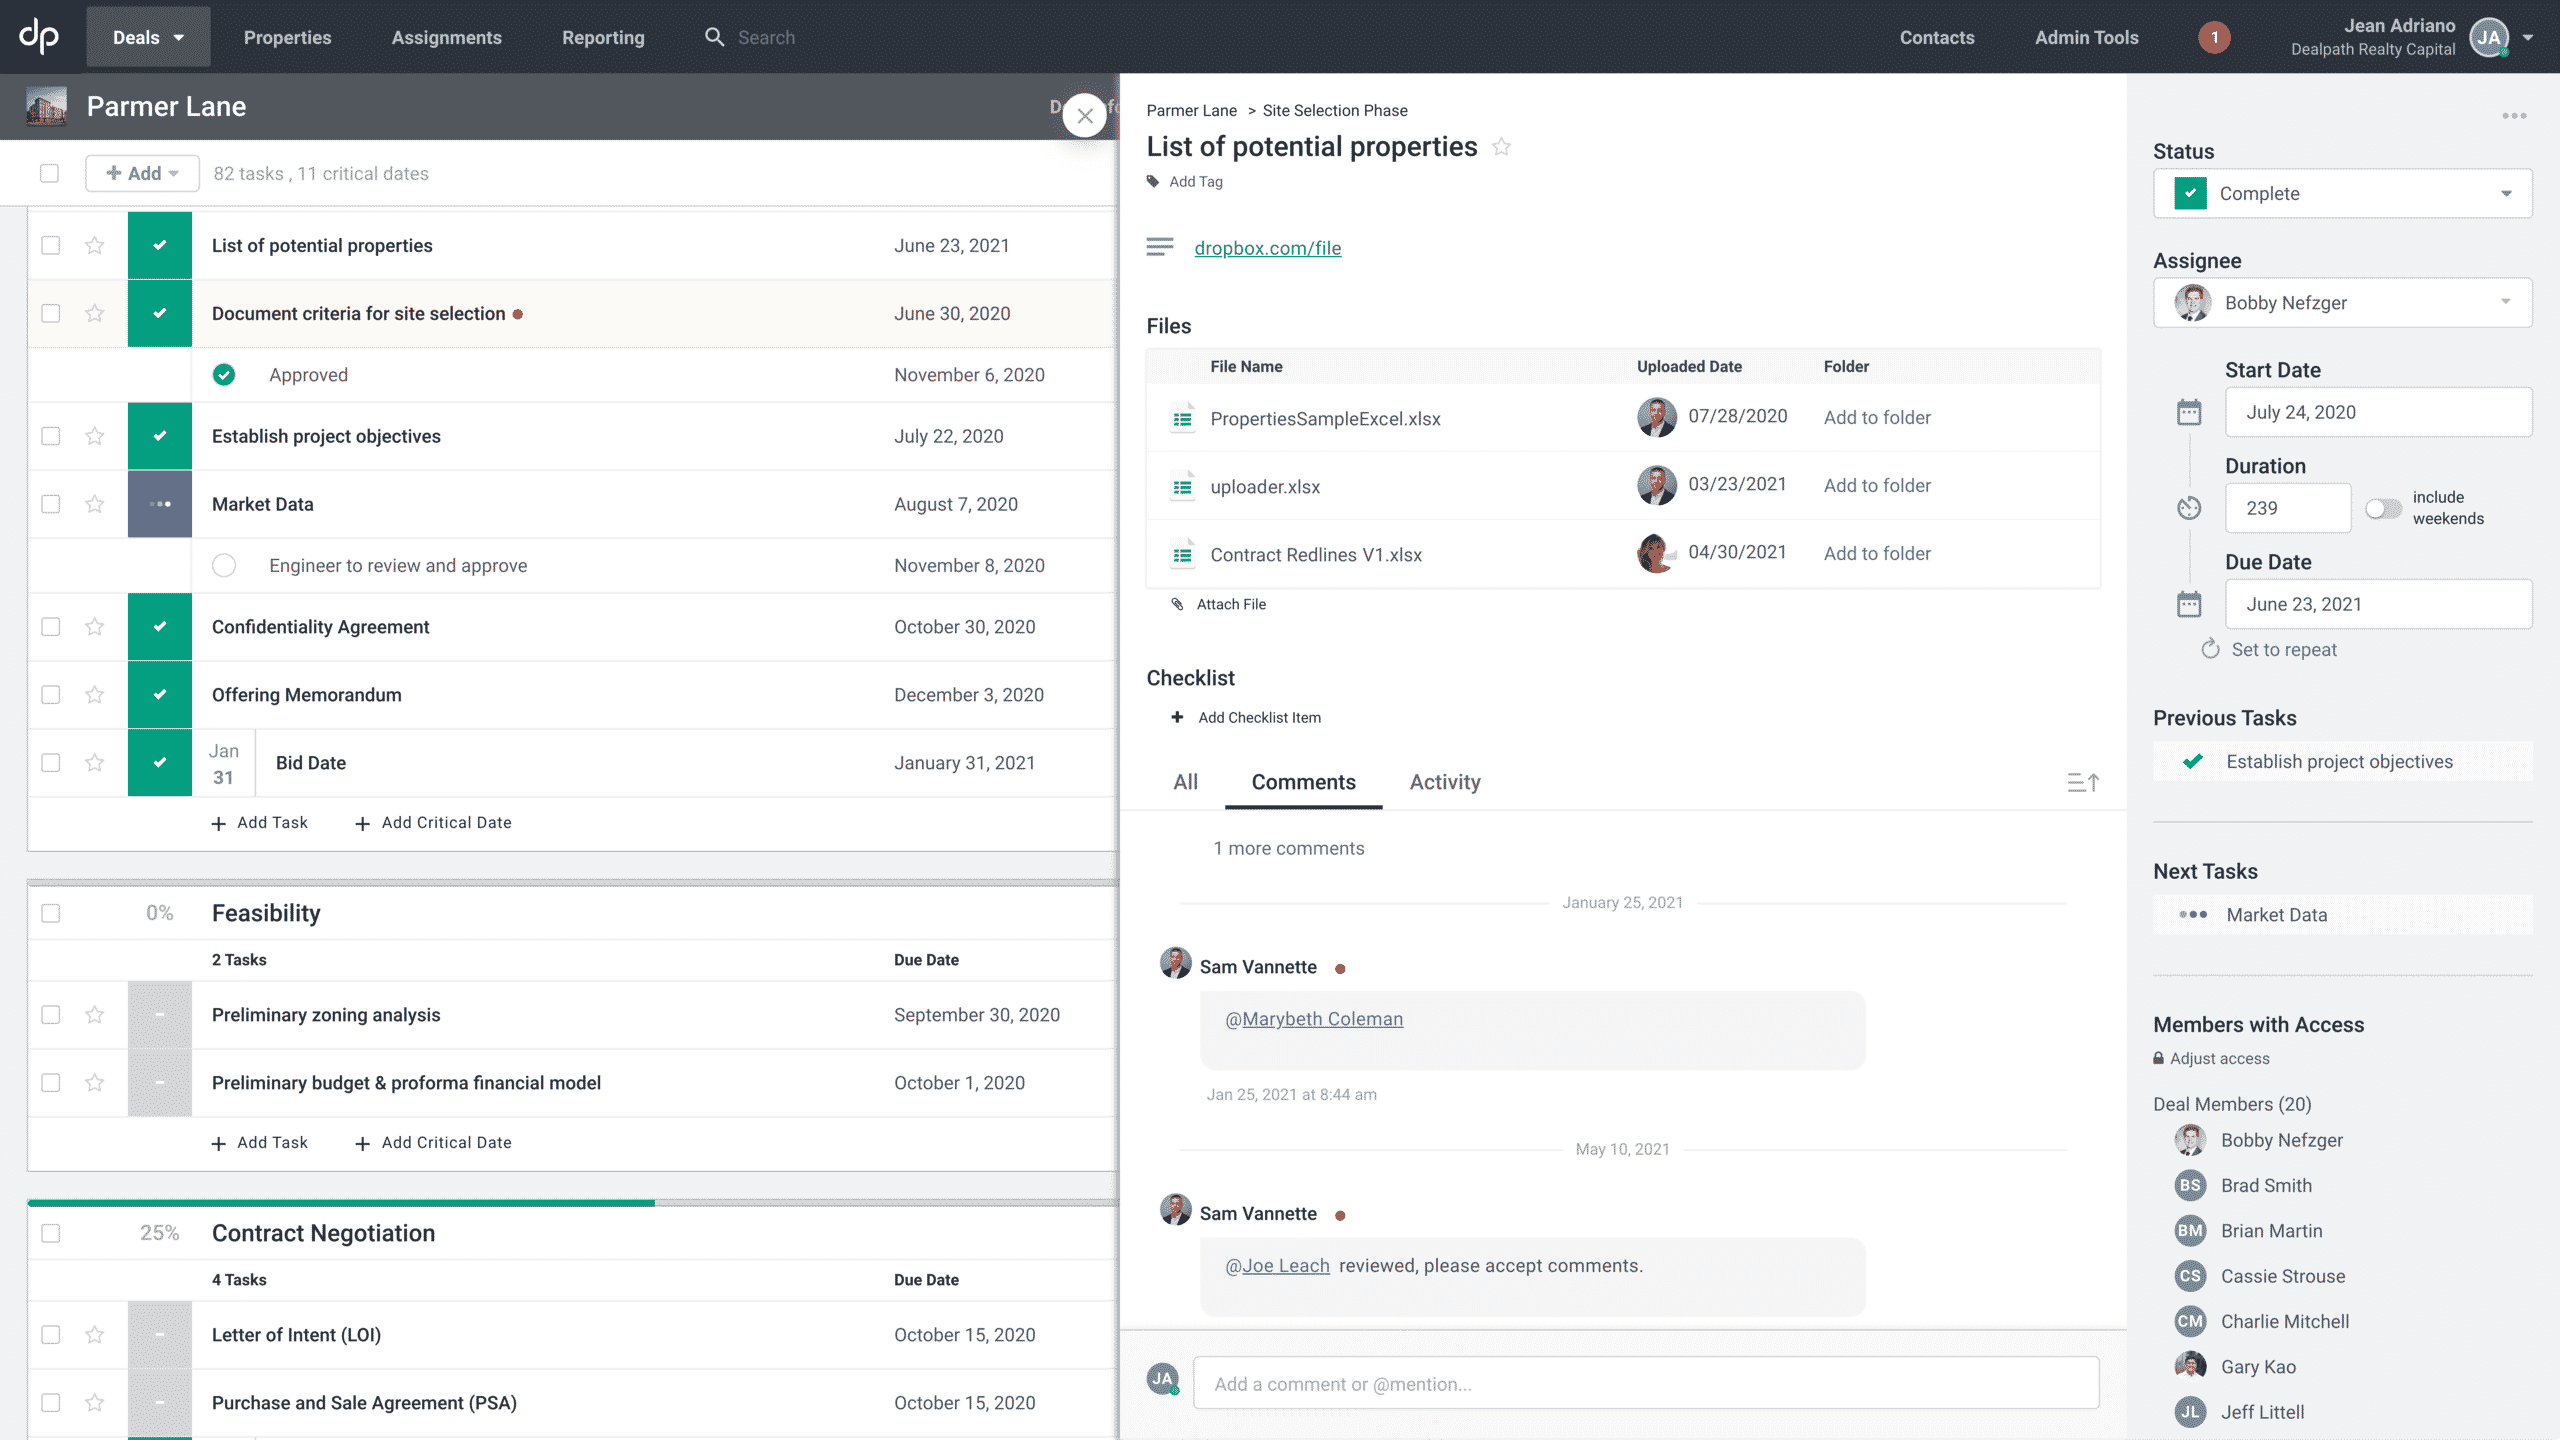 Collaborate by sharing up-to-date files and comments for specific tasks